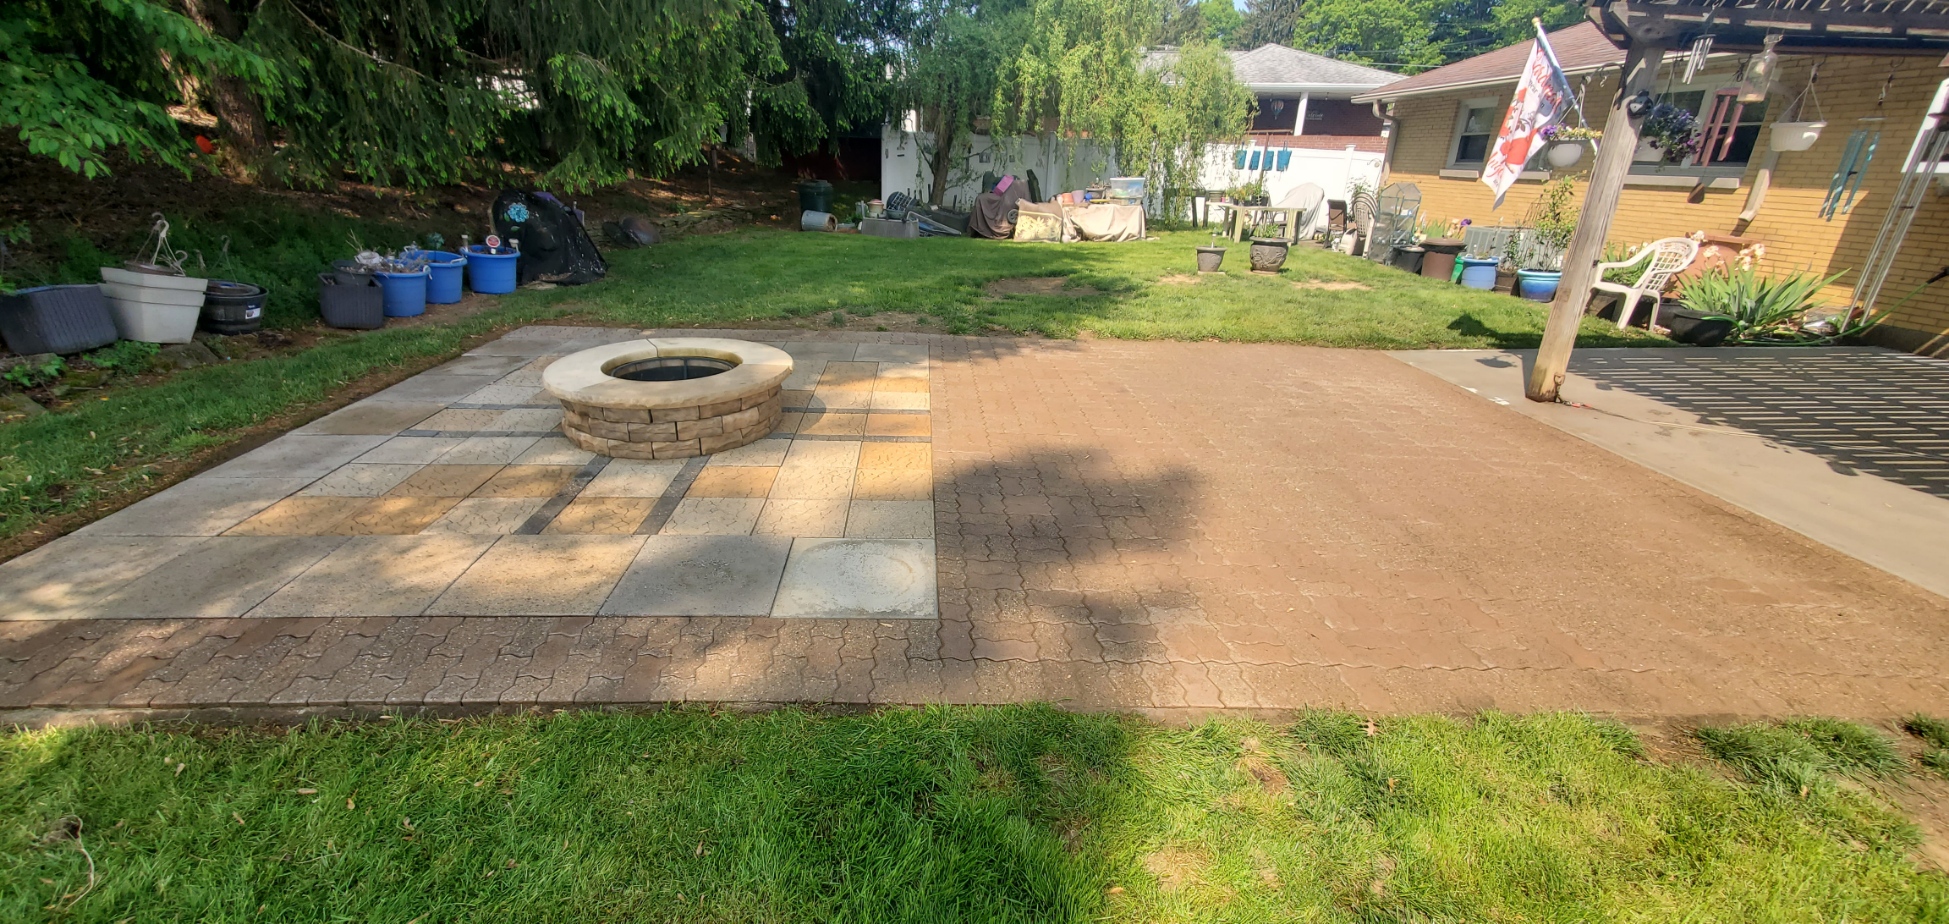 Revealing patio paver cleaning and sealing in Rostraver Township, Pa